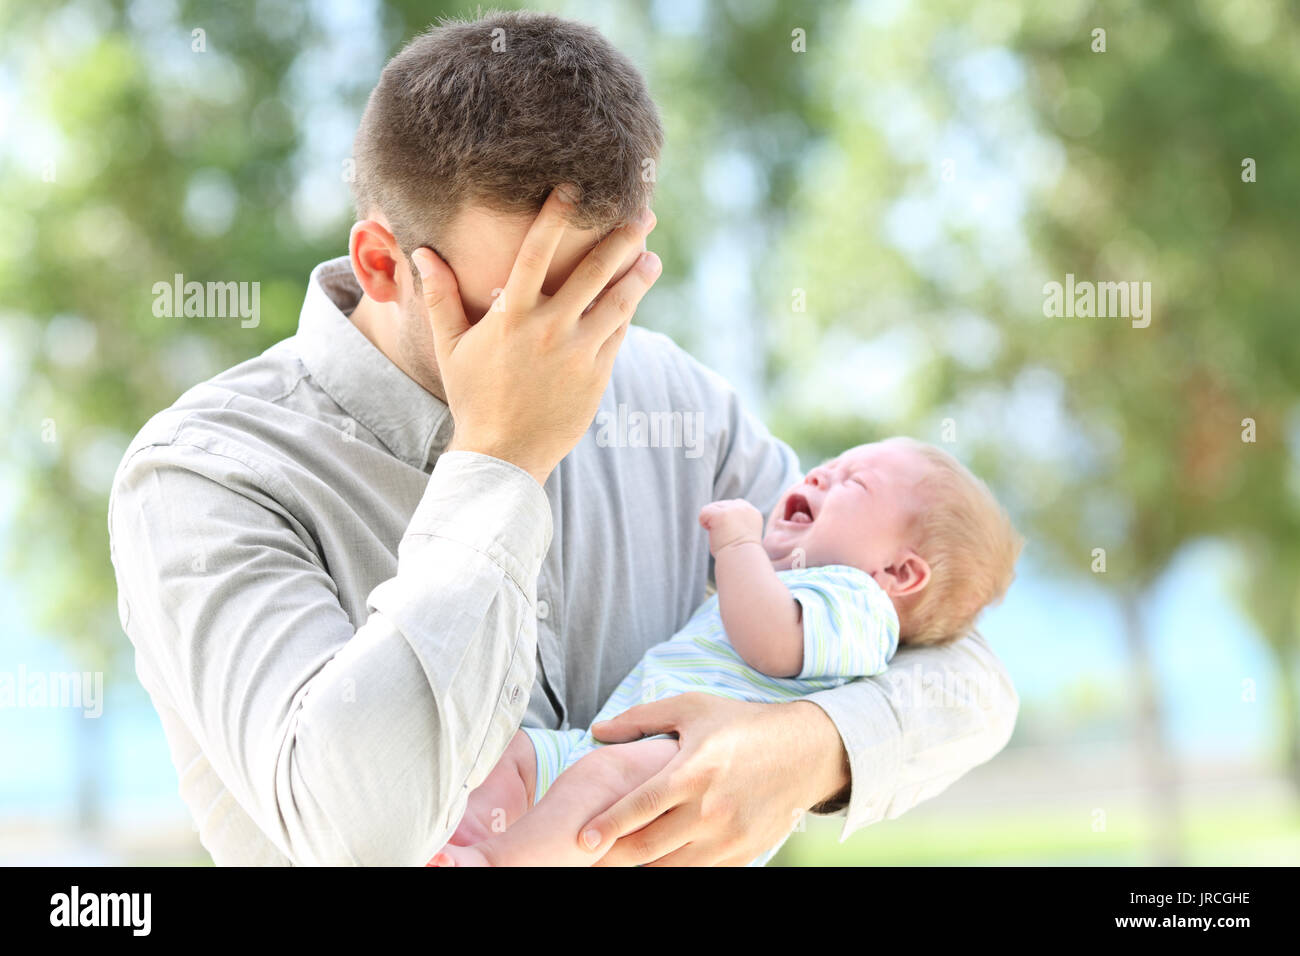 Worried father and baby crying outdoors Stock Photo